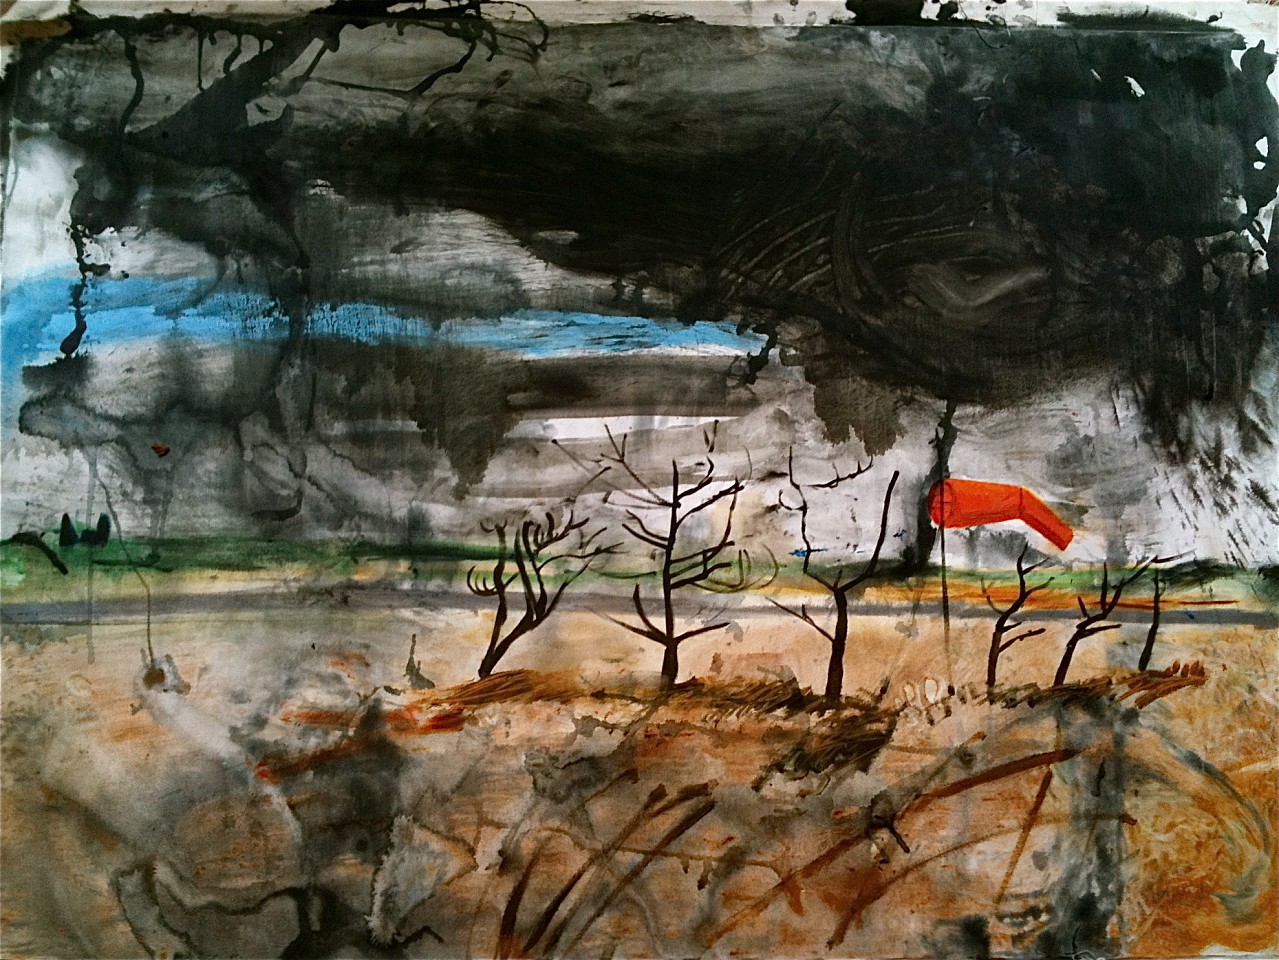 Andy Parsons
Landscape with Windsock, 2011-14
oil on canvas, 48 x 84 in.